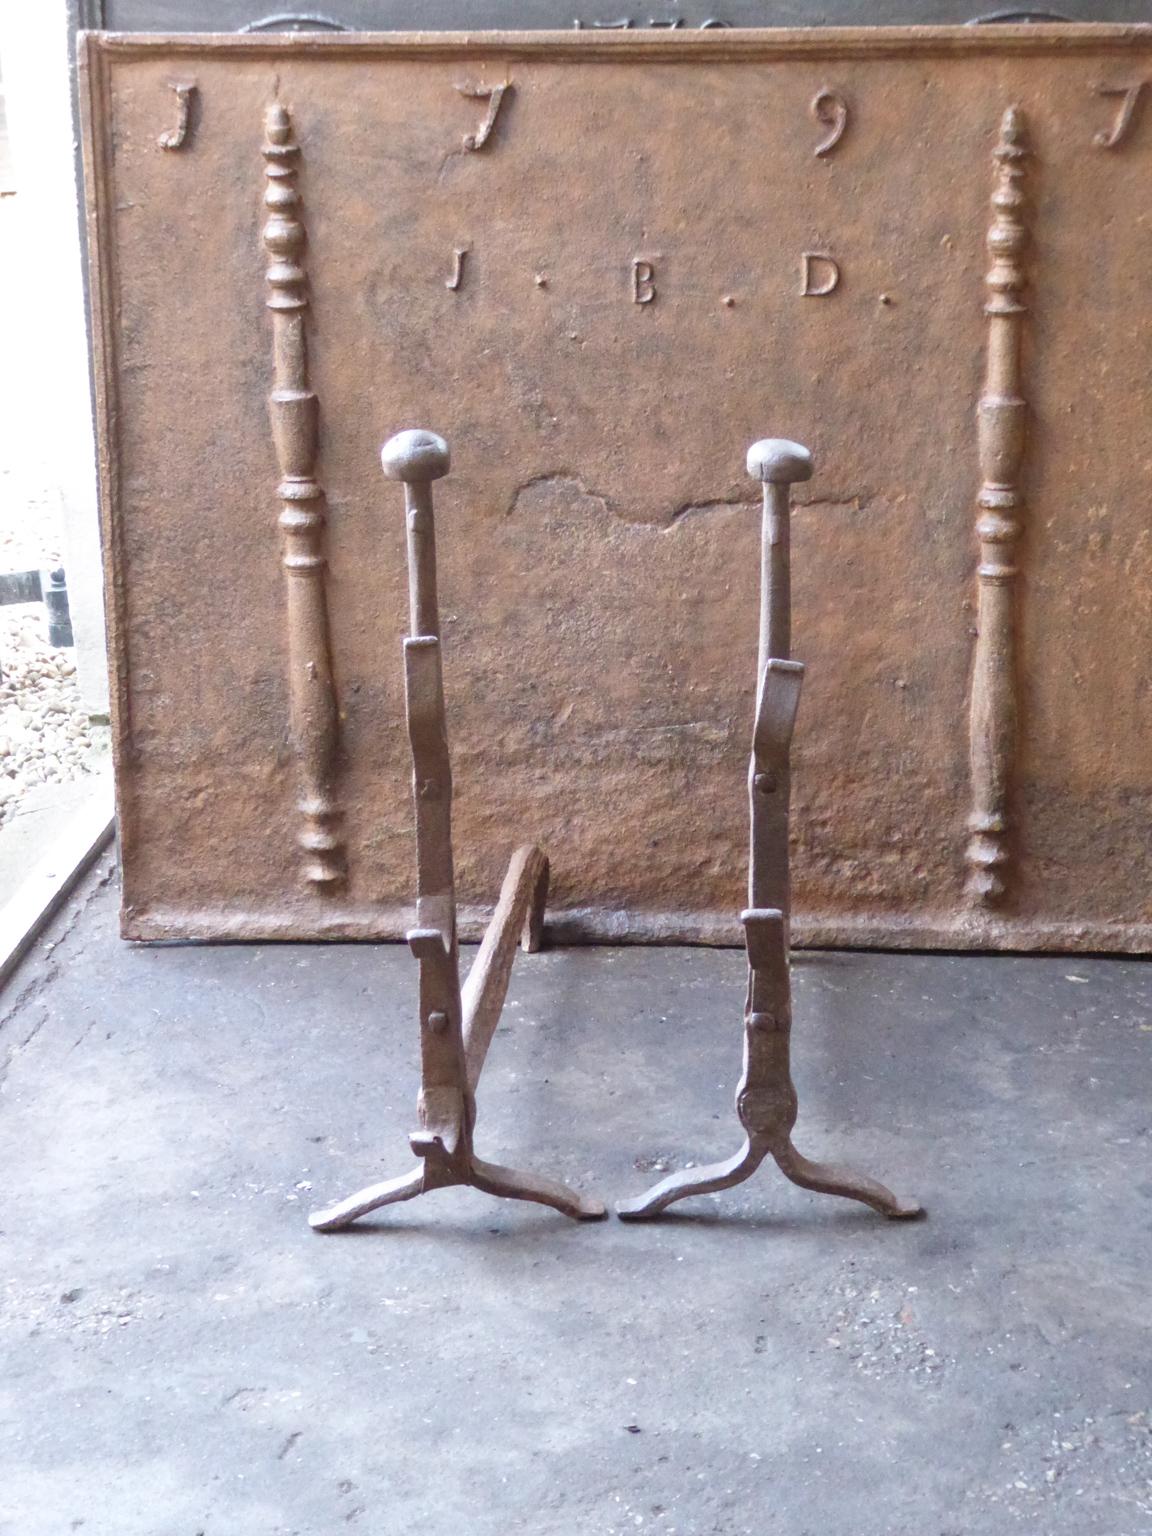 17th-18th century French andirons made of wrought iron. The style of the andirons is Gothic. The andirons have spit hooks to grill food. They are in a good condition.